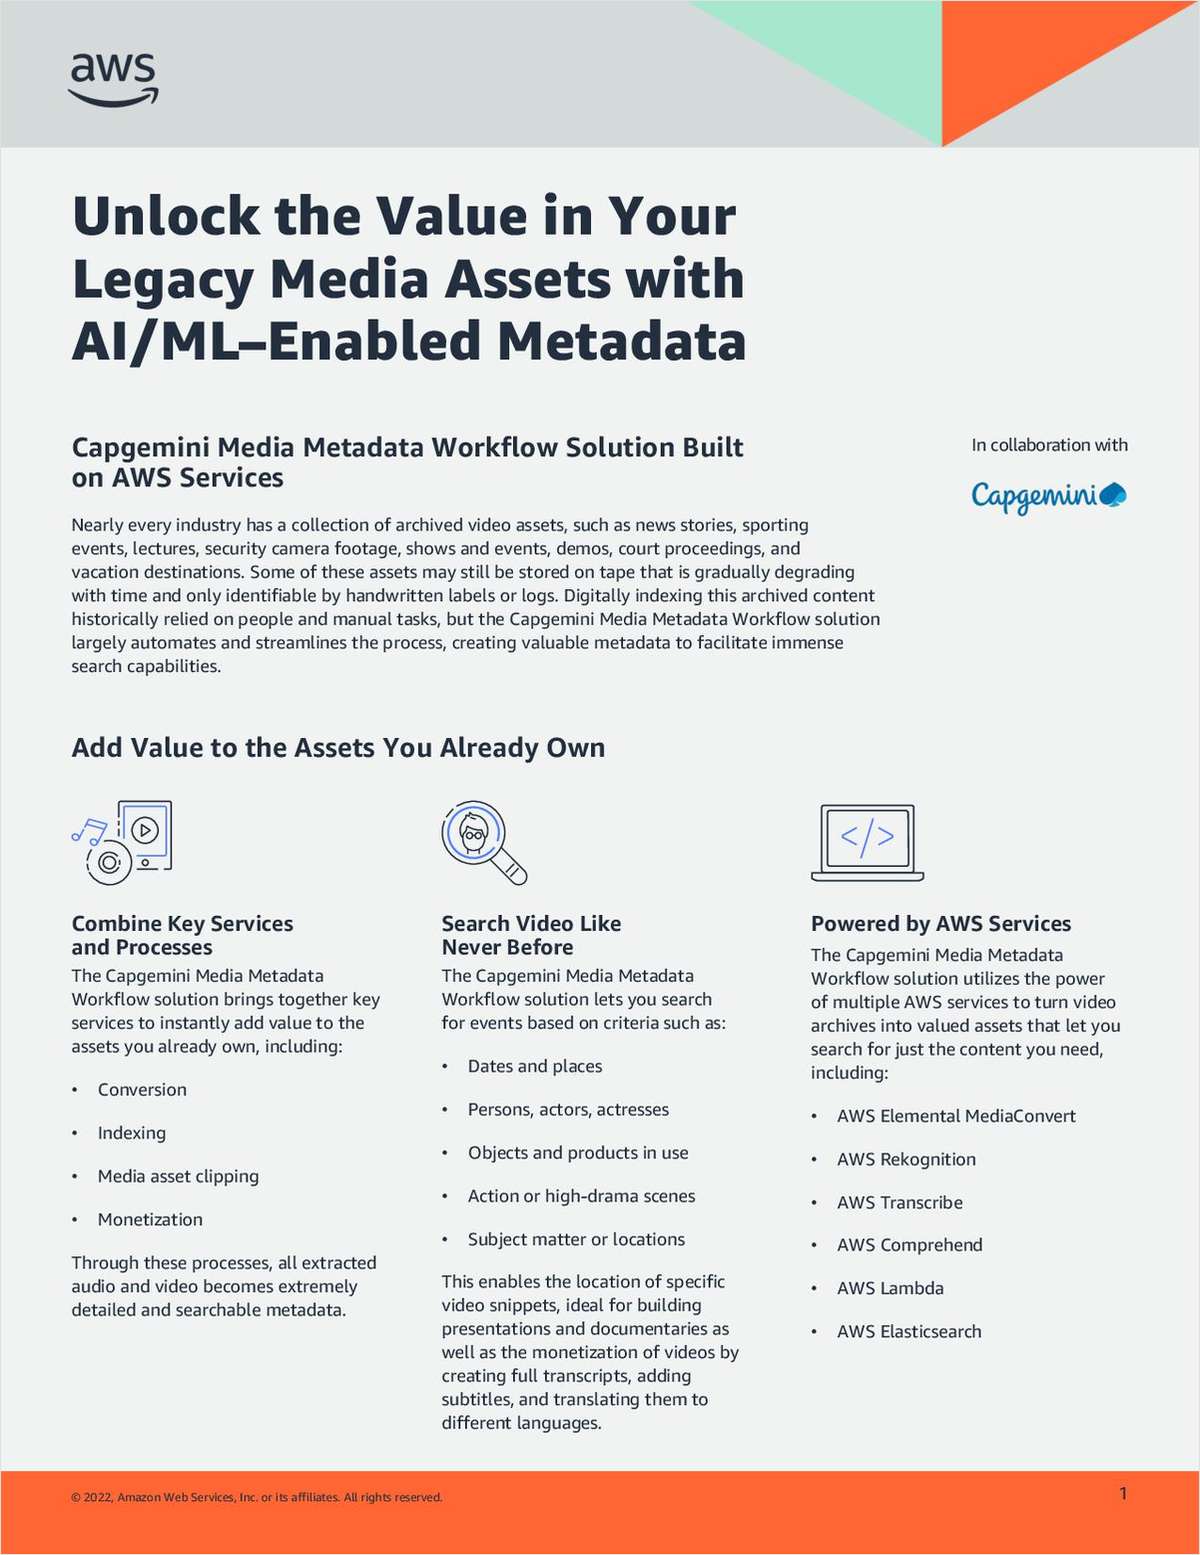 Unlock the Value in Your Legacy Media Assets with AI/ML--Enabled Metadata